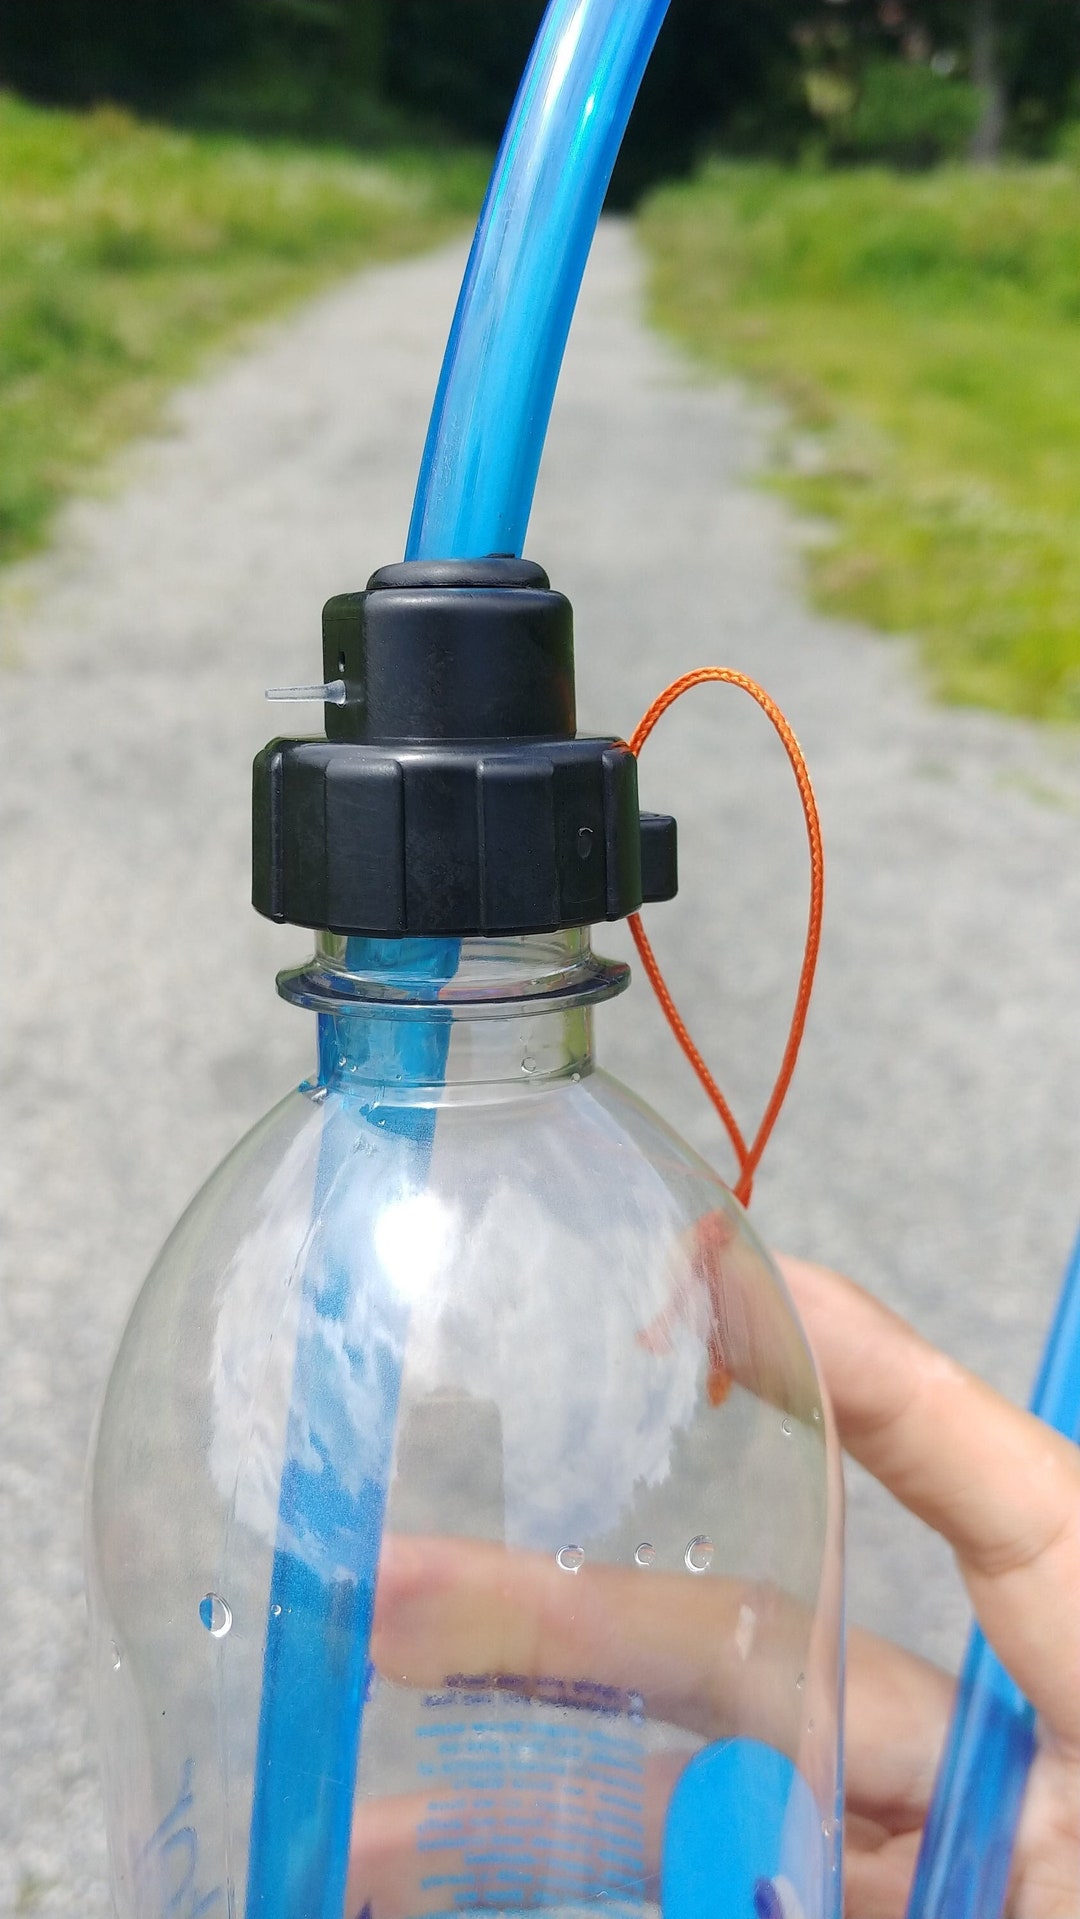 Collapsible Water Bottle - Hydration Made Easy